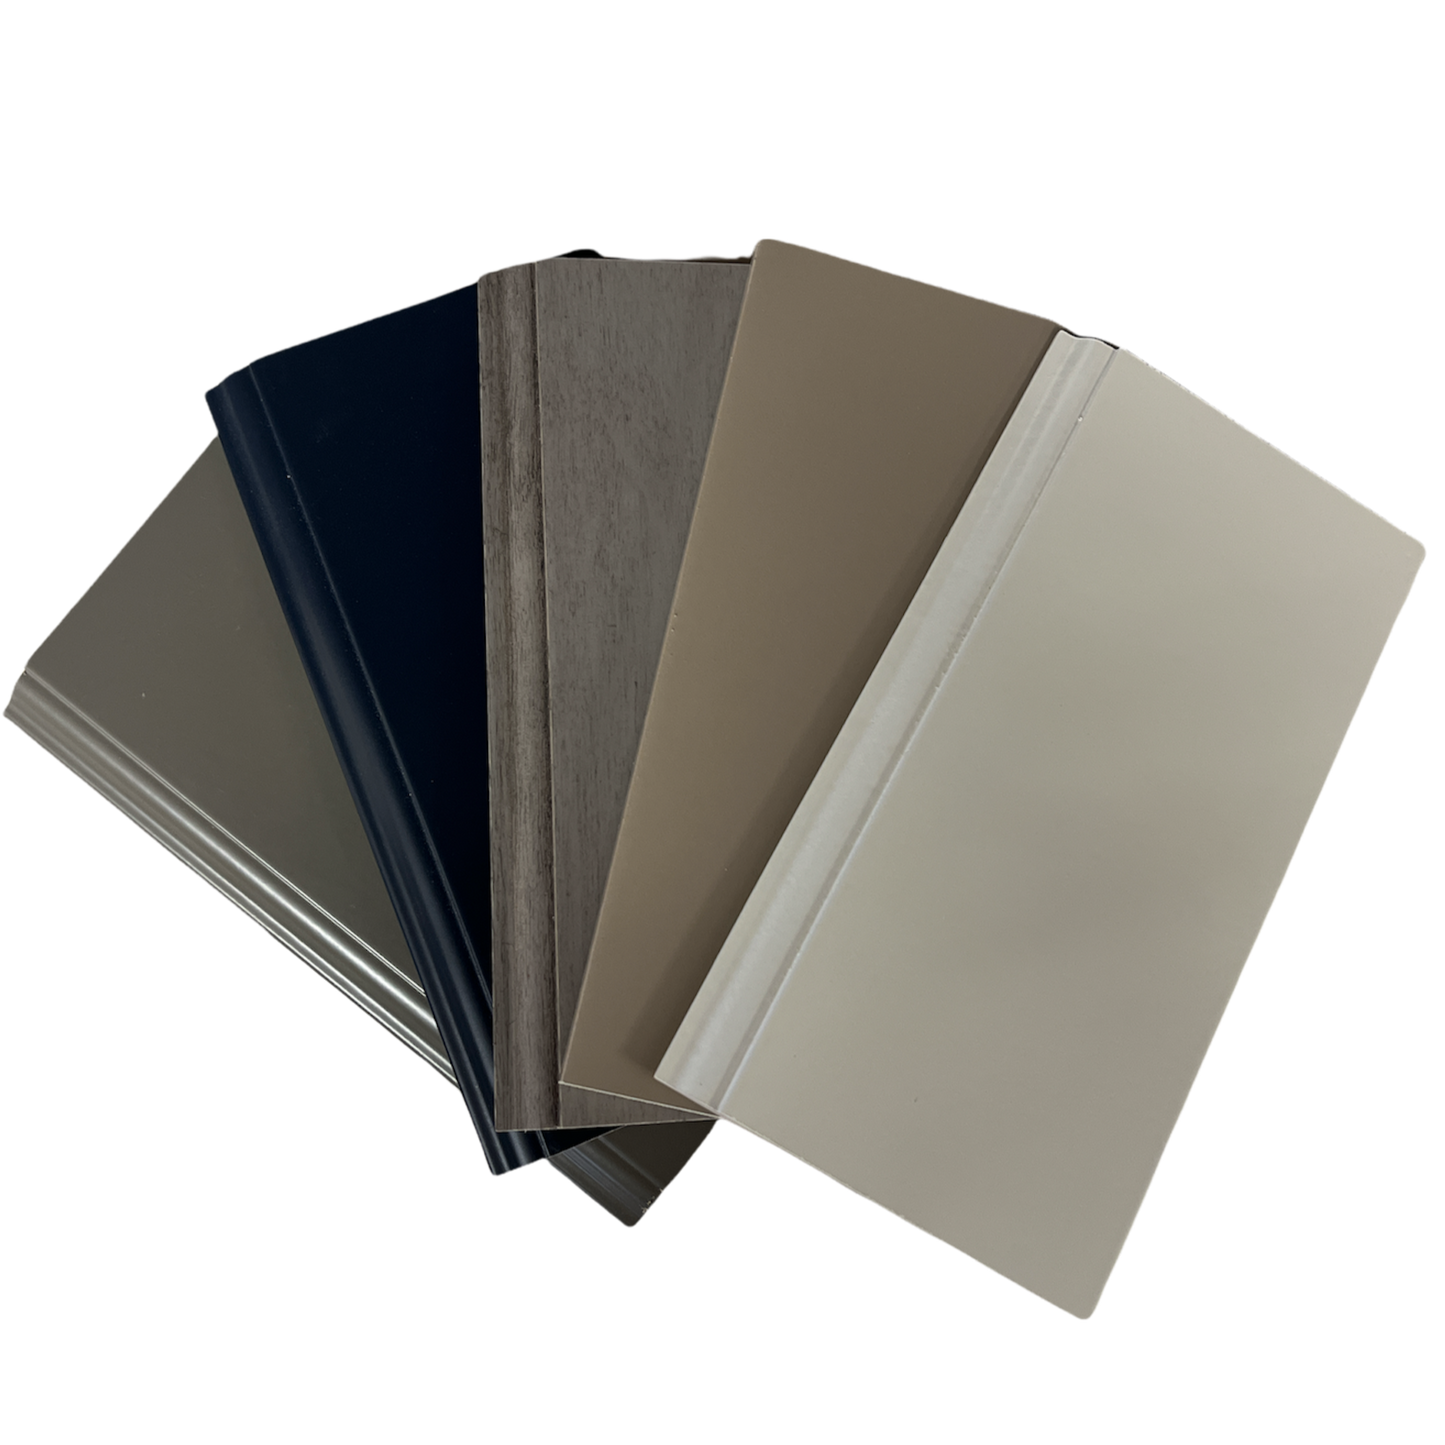 Fabuwood Sample Color Block Group Photo showing Stone, Indigo, Horizon, Oyster and White Finishes fanned out